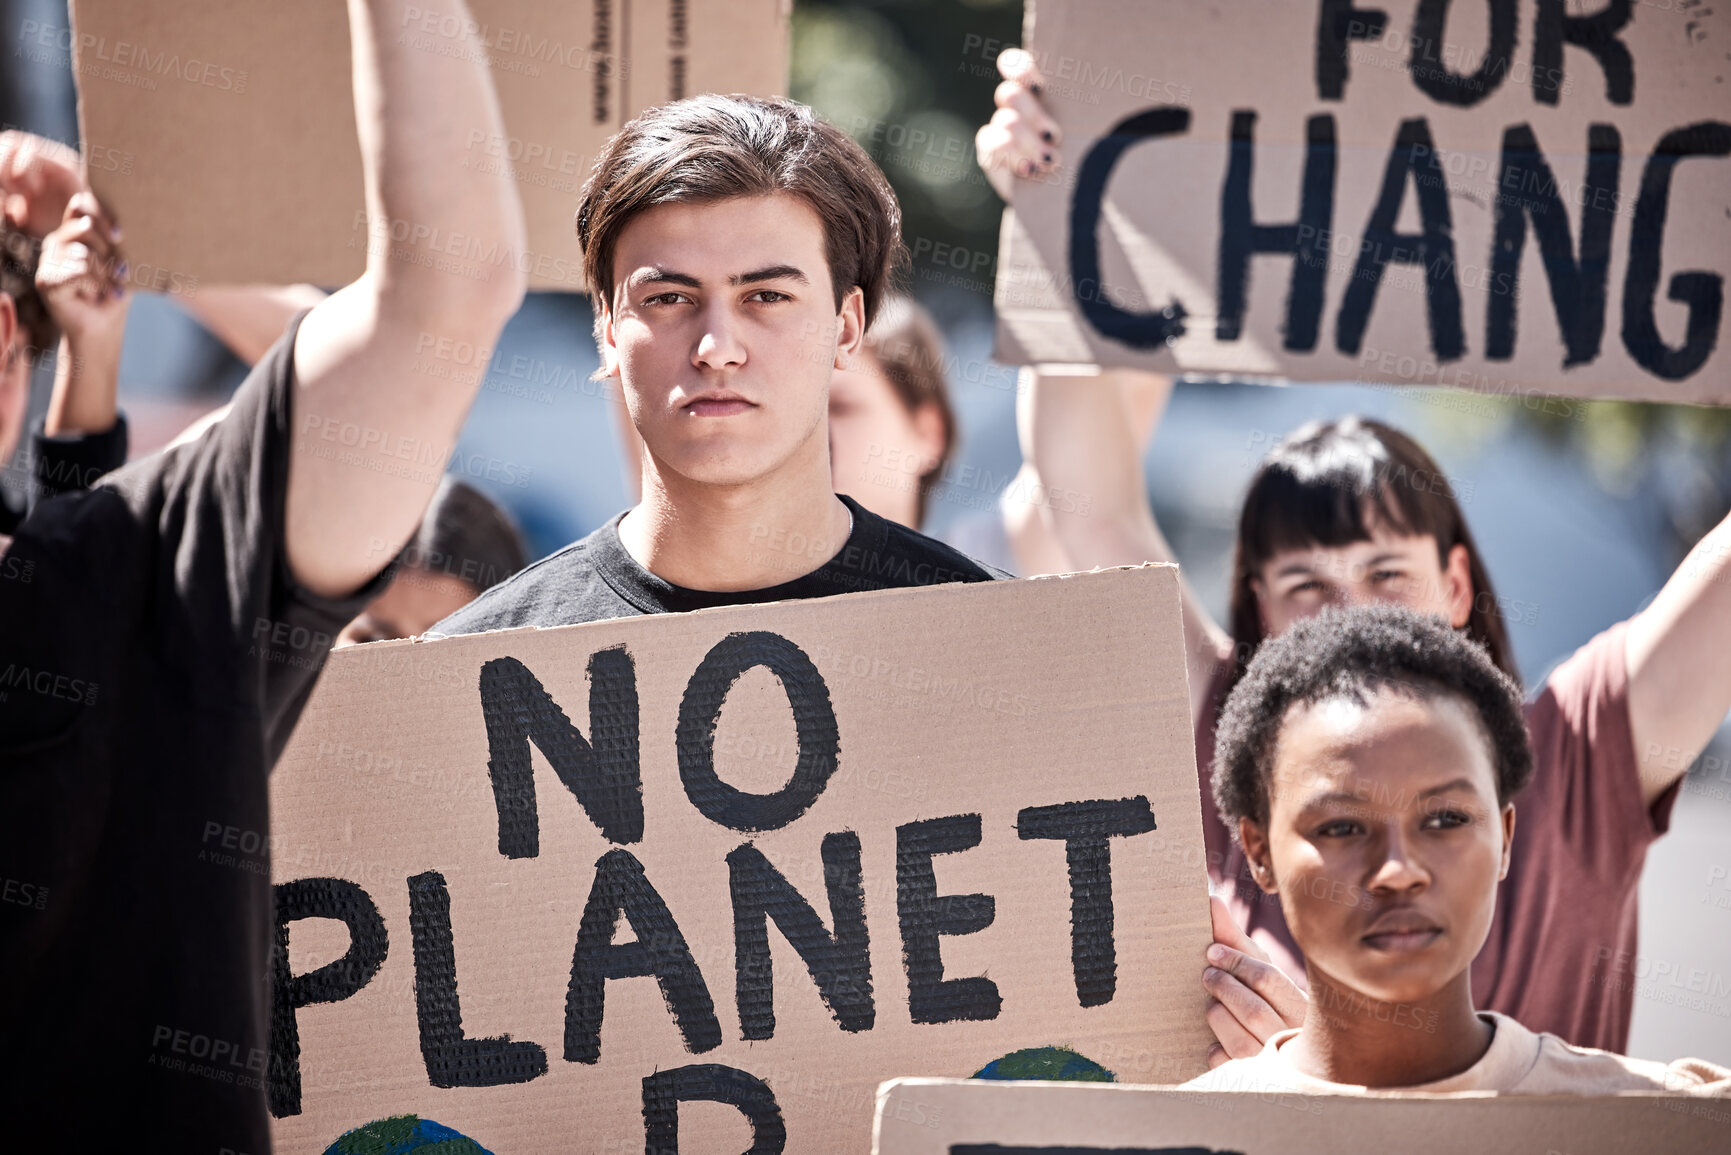 Buy stock photo Shot of a group of young people during a protest rally holding placards